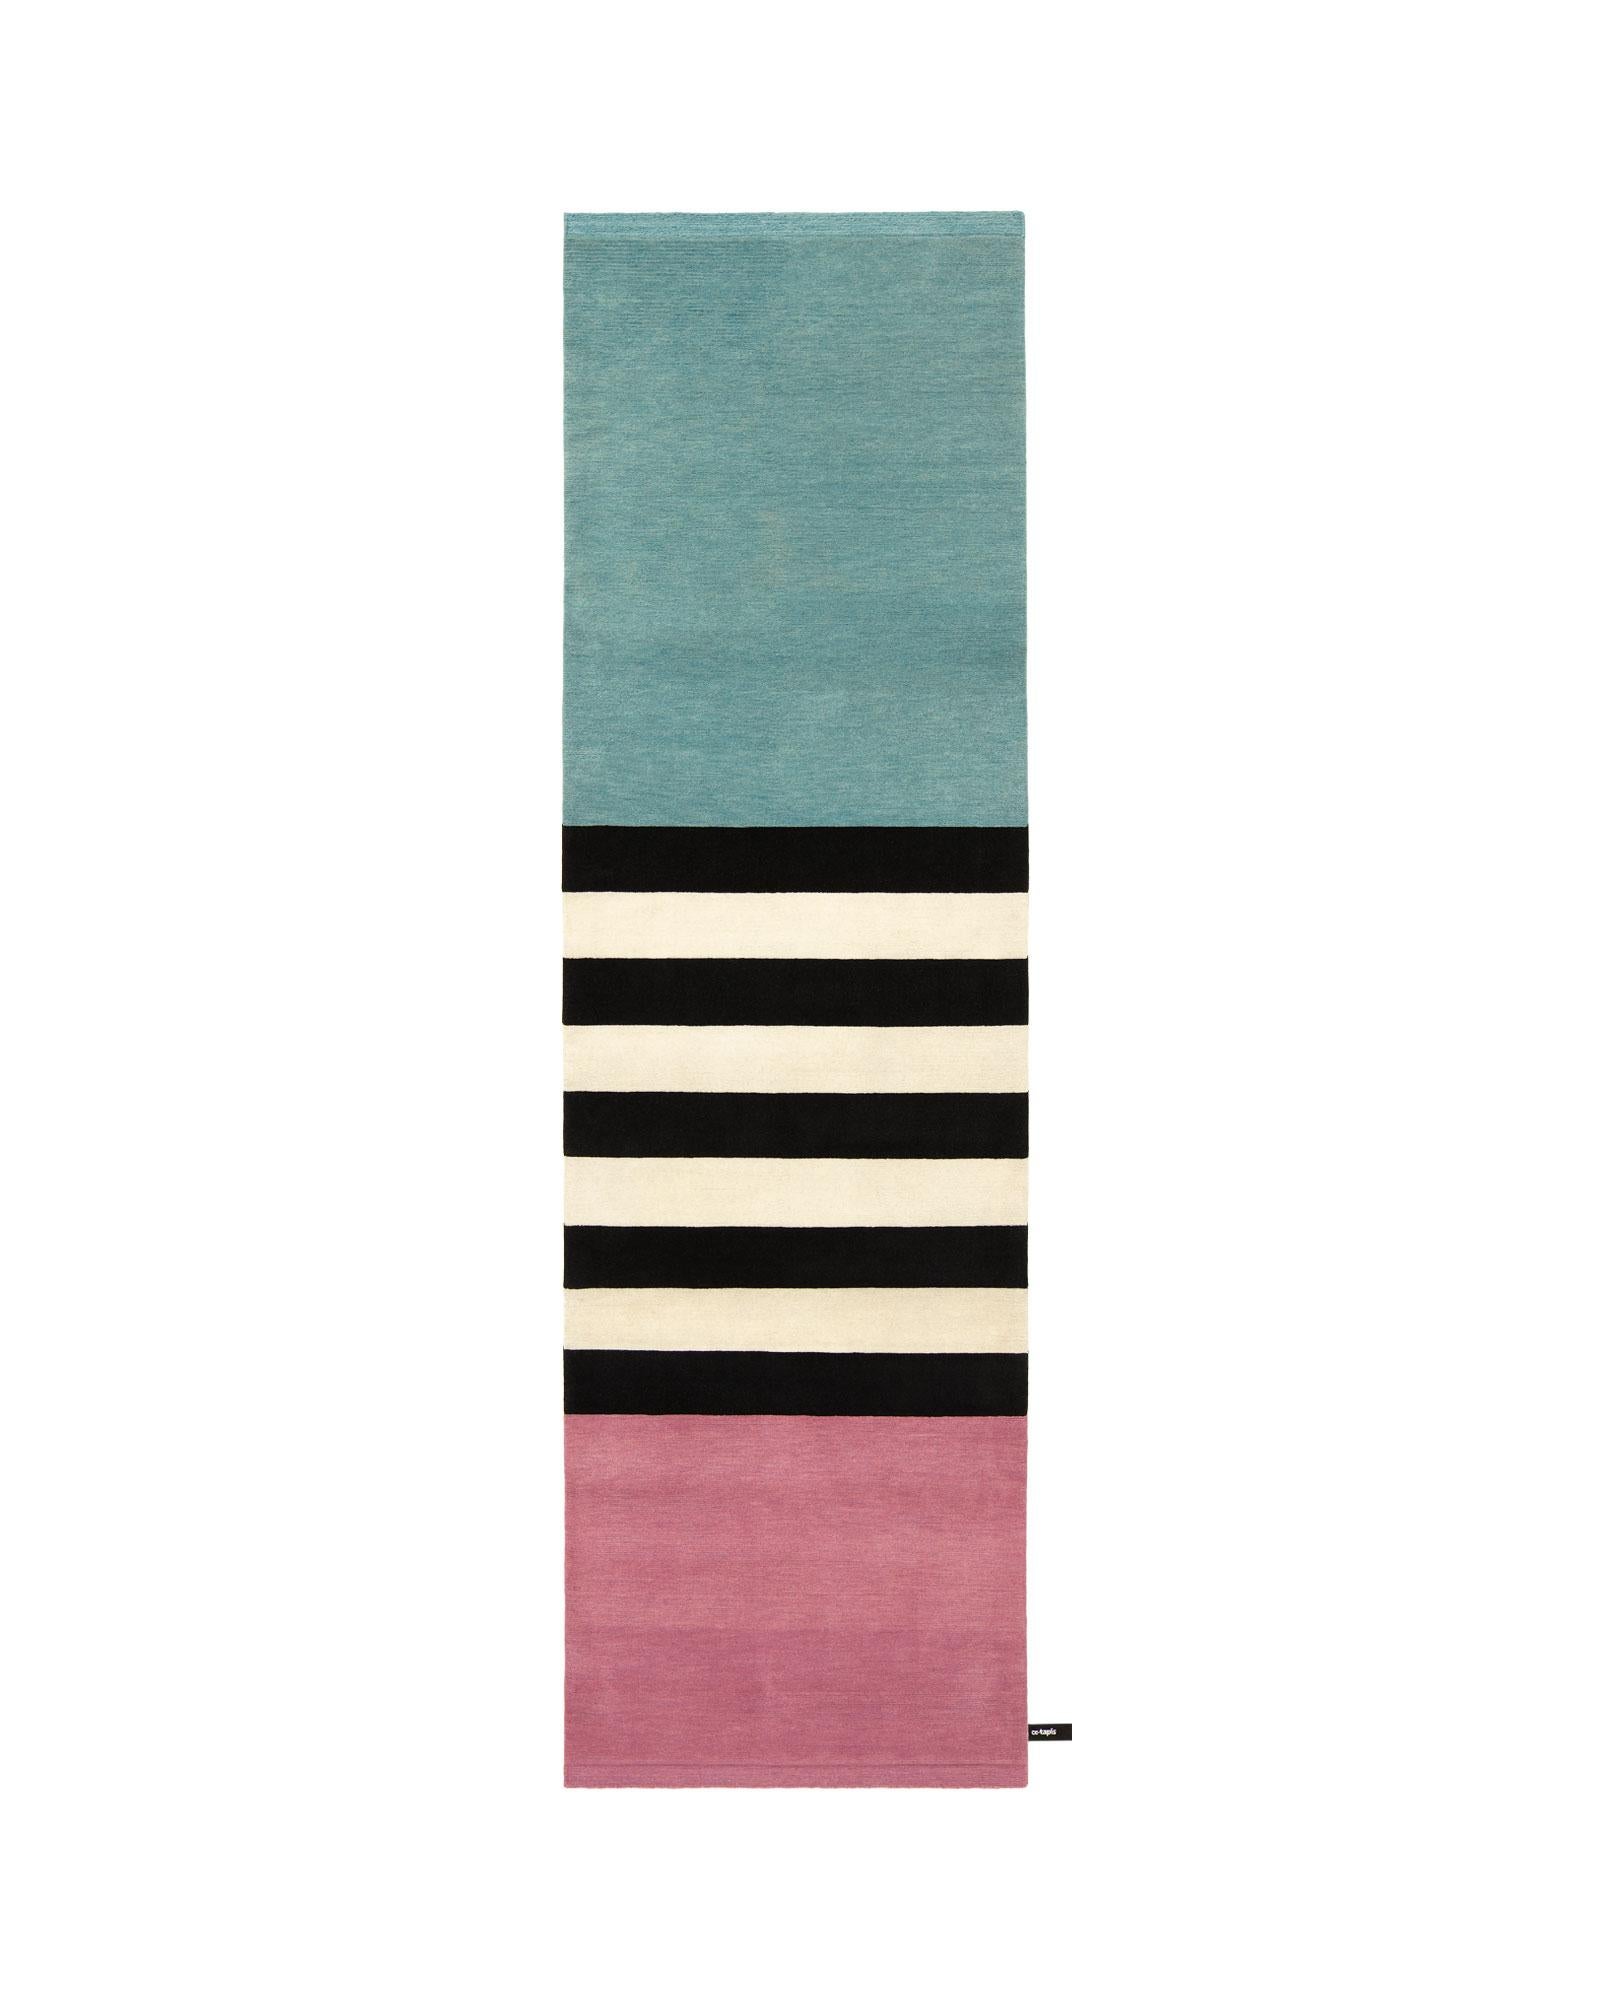 cc-tapis launches the Les Arcs collection by French designer and architect Charlotte Perriand featuring 5 new rug designs and unseen archives in an all-encompassing exhibition curated by Dan Thawley, editor in chief of magazine “A magazine curated